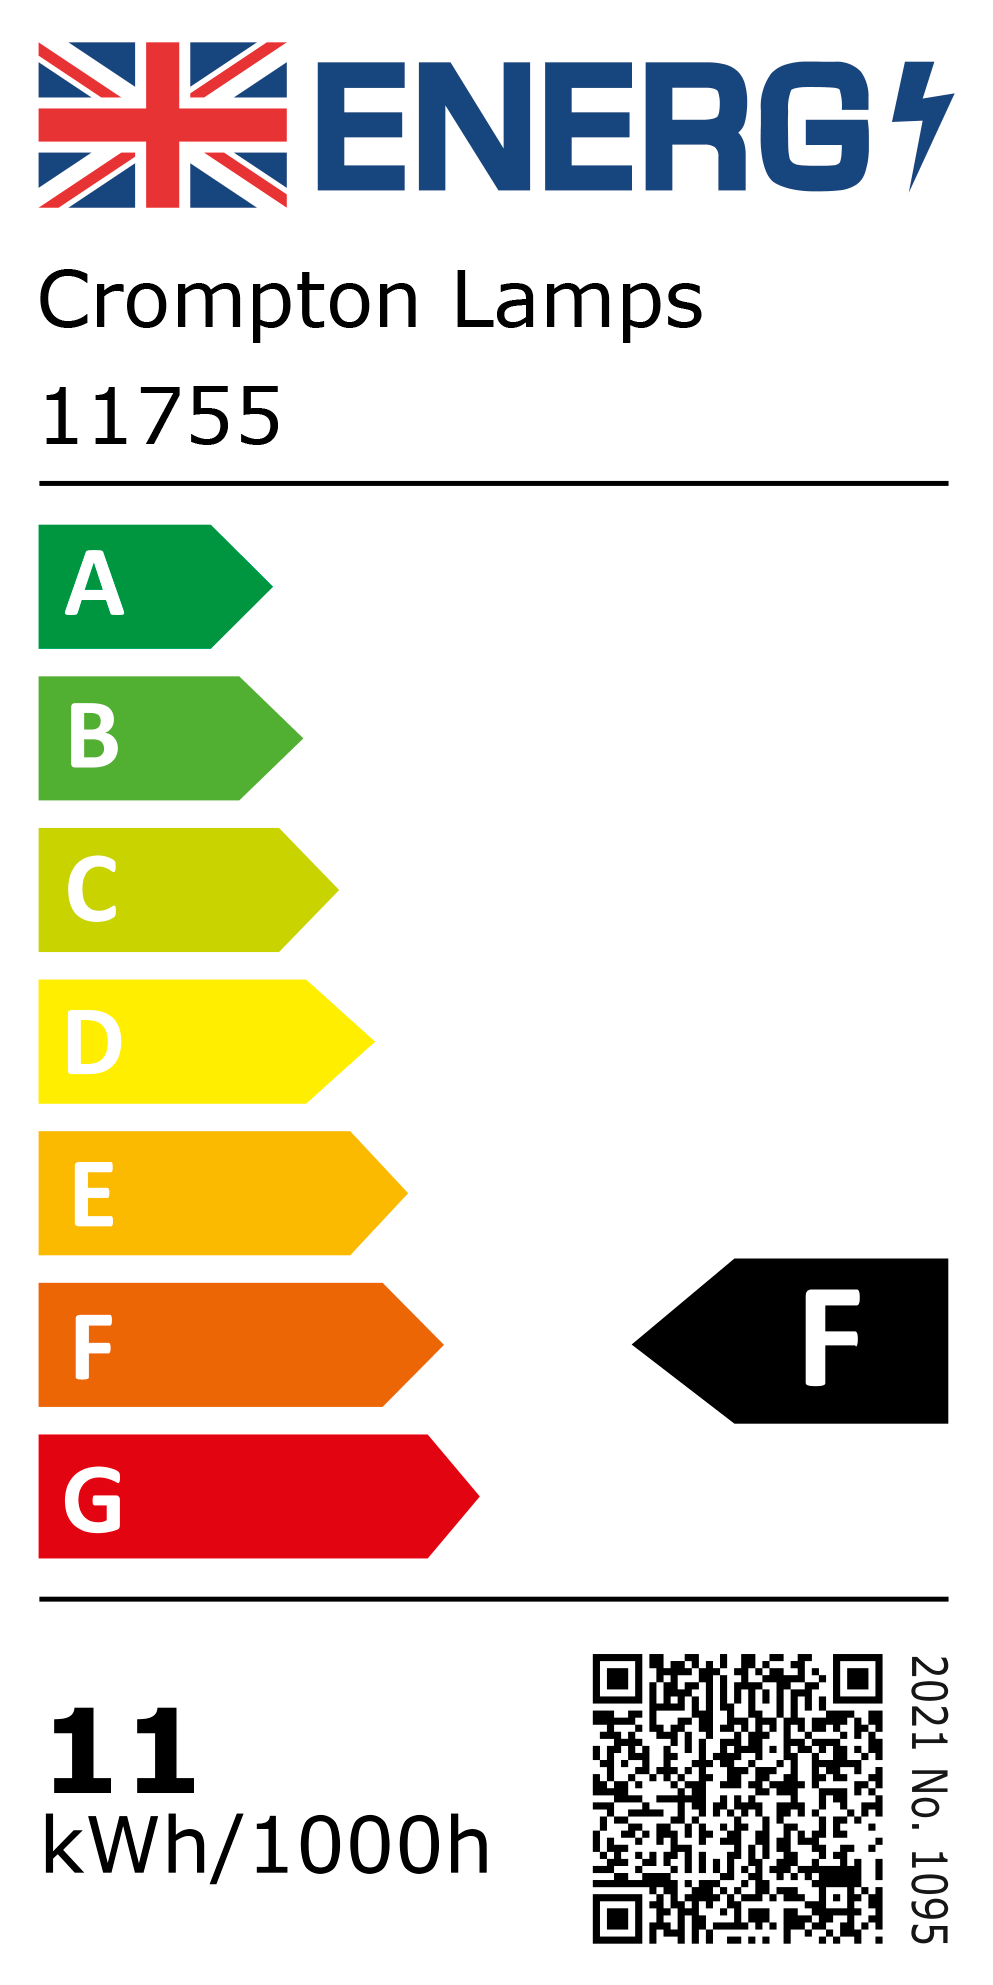 New 2021 Energy Rating Label: Stock Code 11755